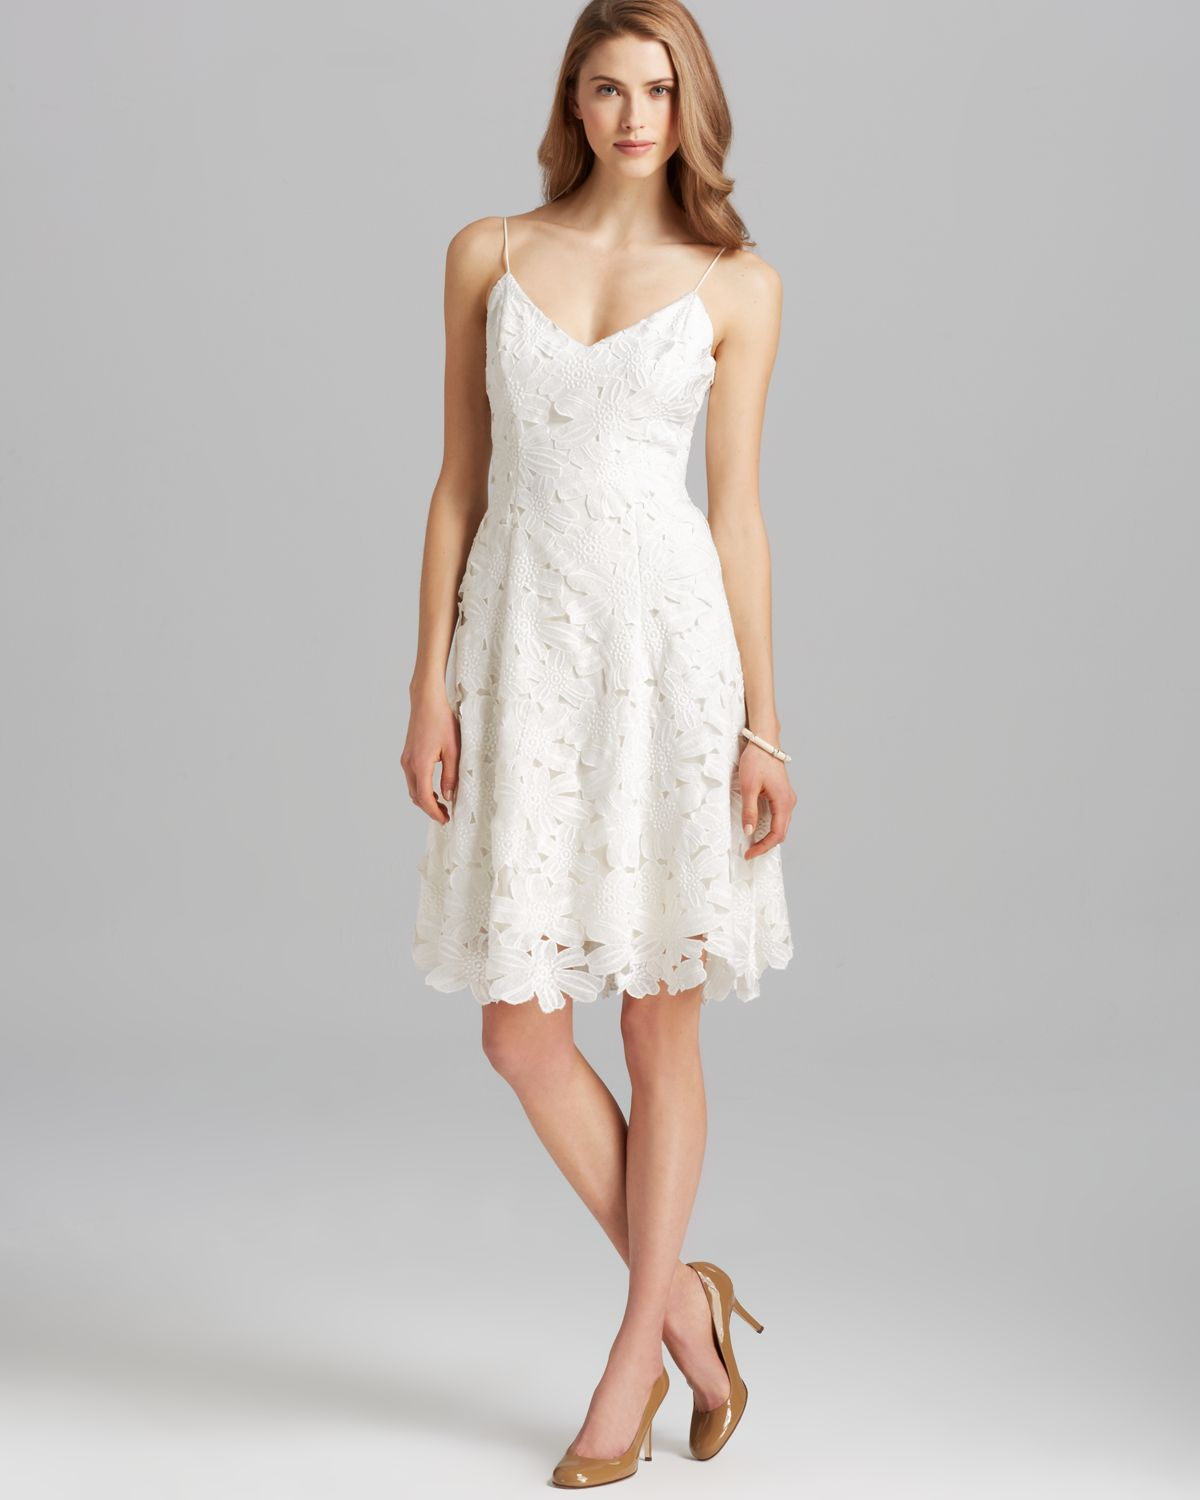 Lyst - Vera Wang Dress - V Neck Spaghetti Strap Lace Fit And Flare in White